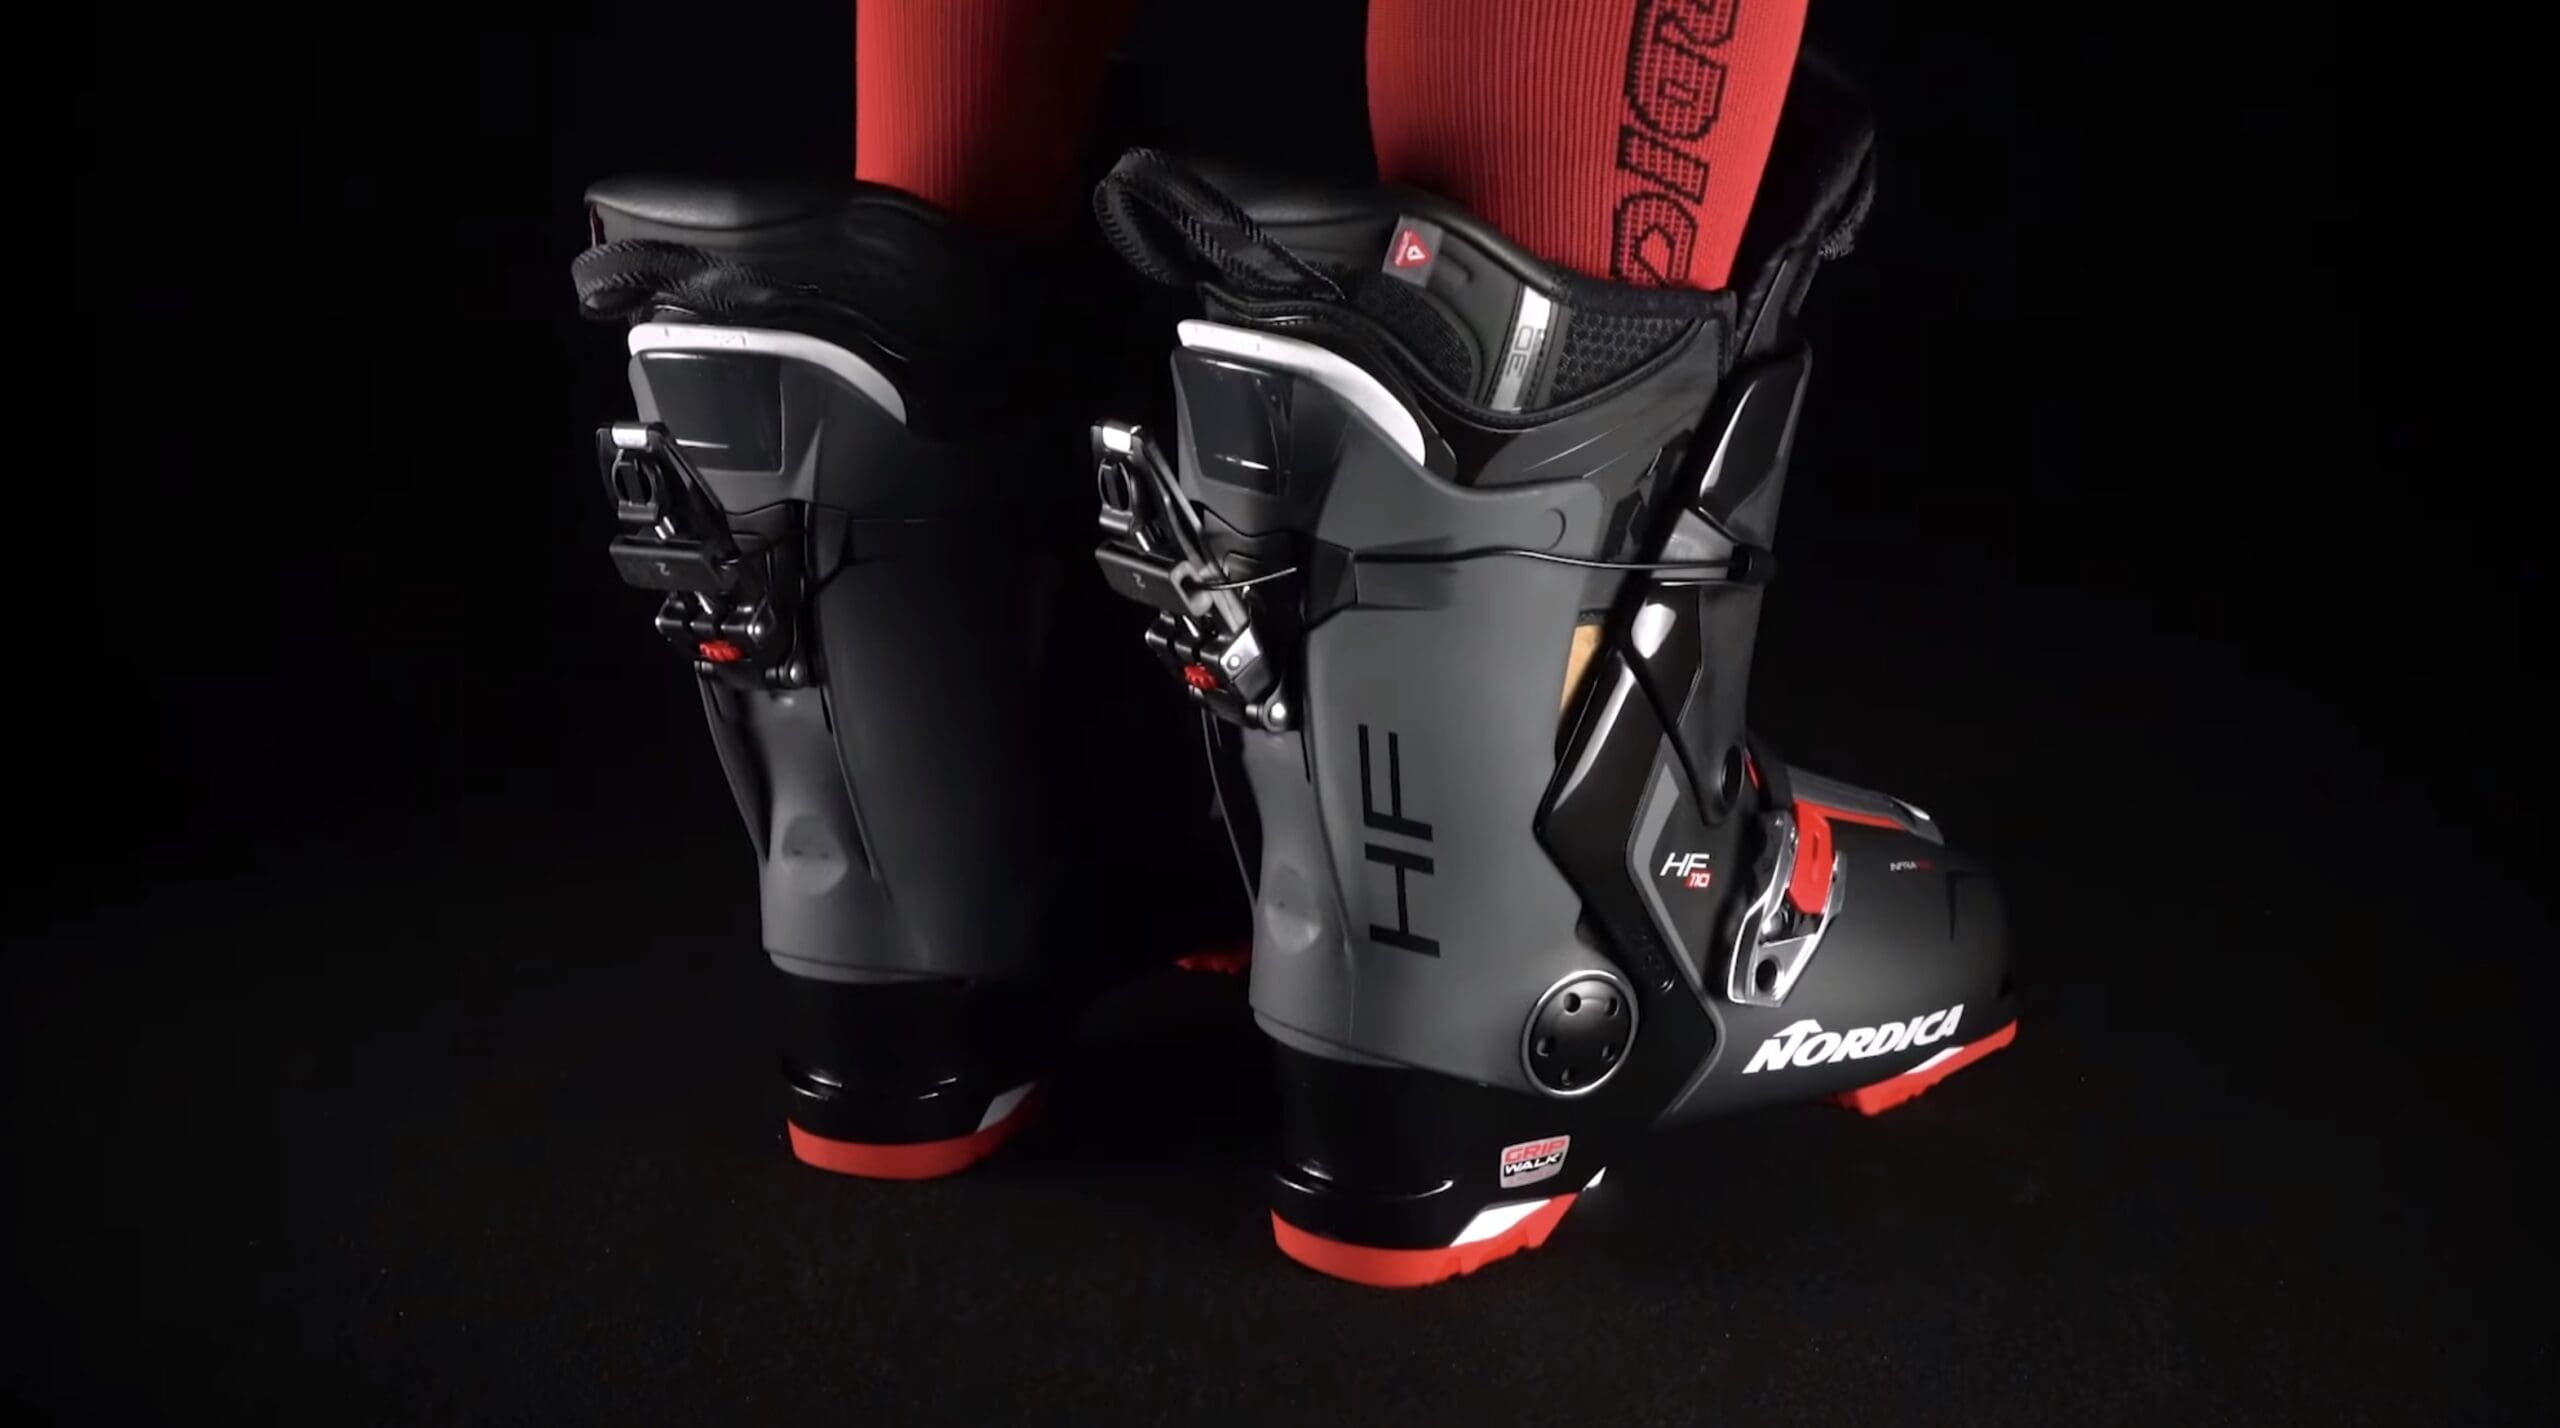 Rear Entry Ski Boots Are BACK! Nordica Introduces The New HF Ski Boot